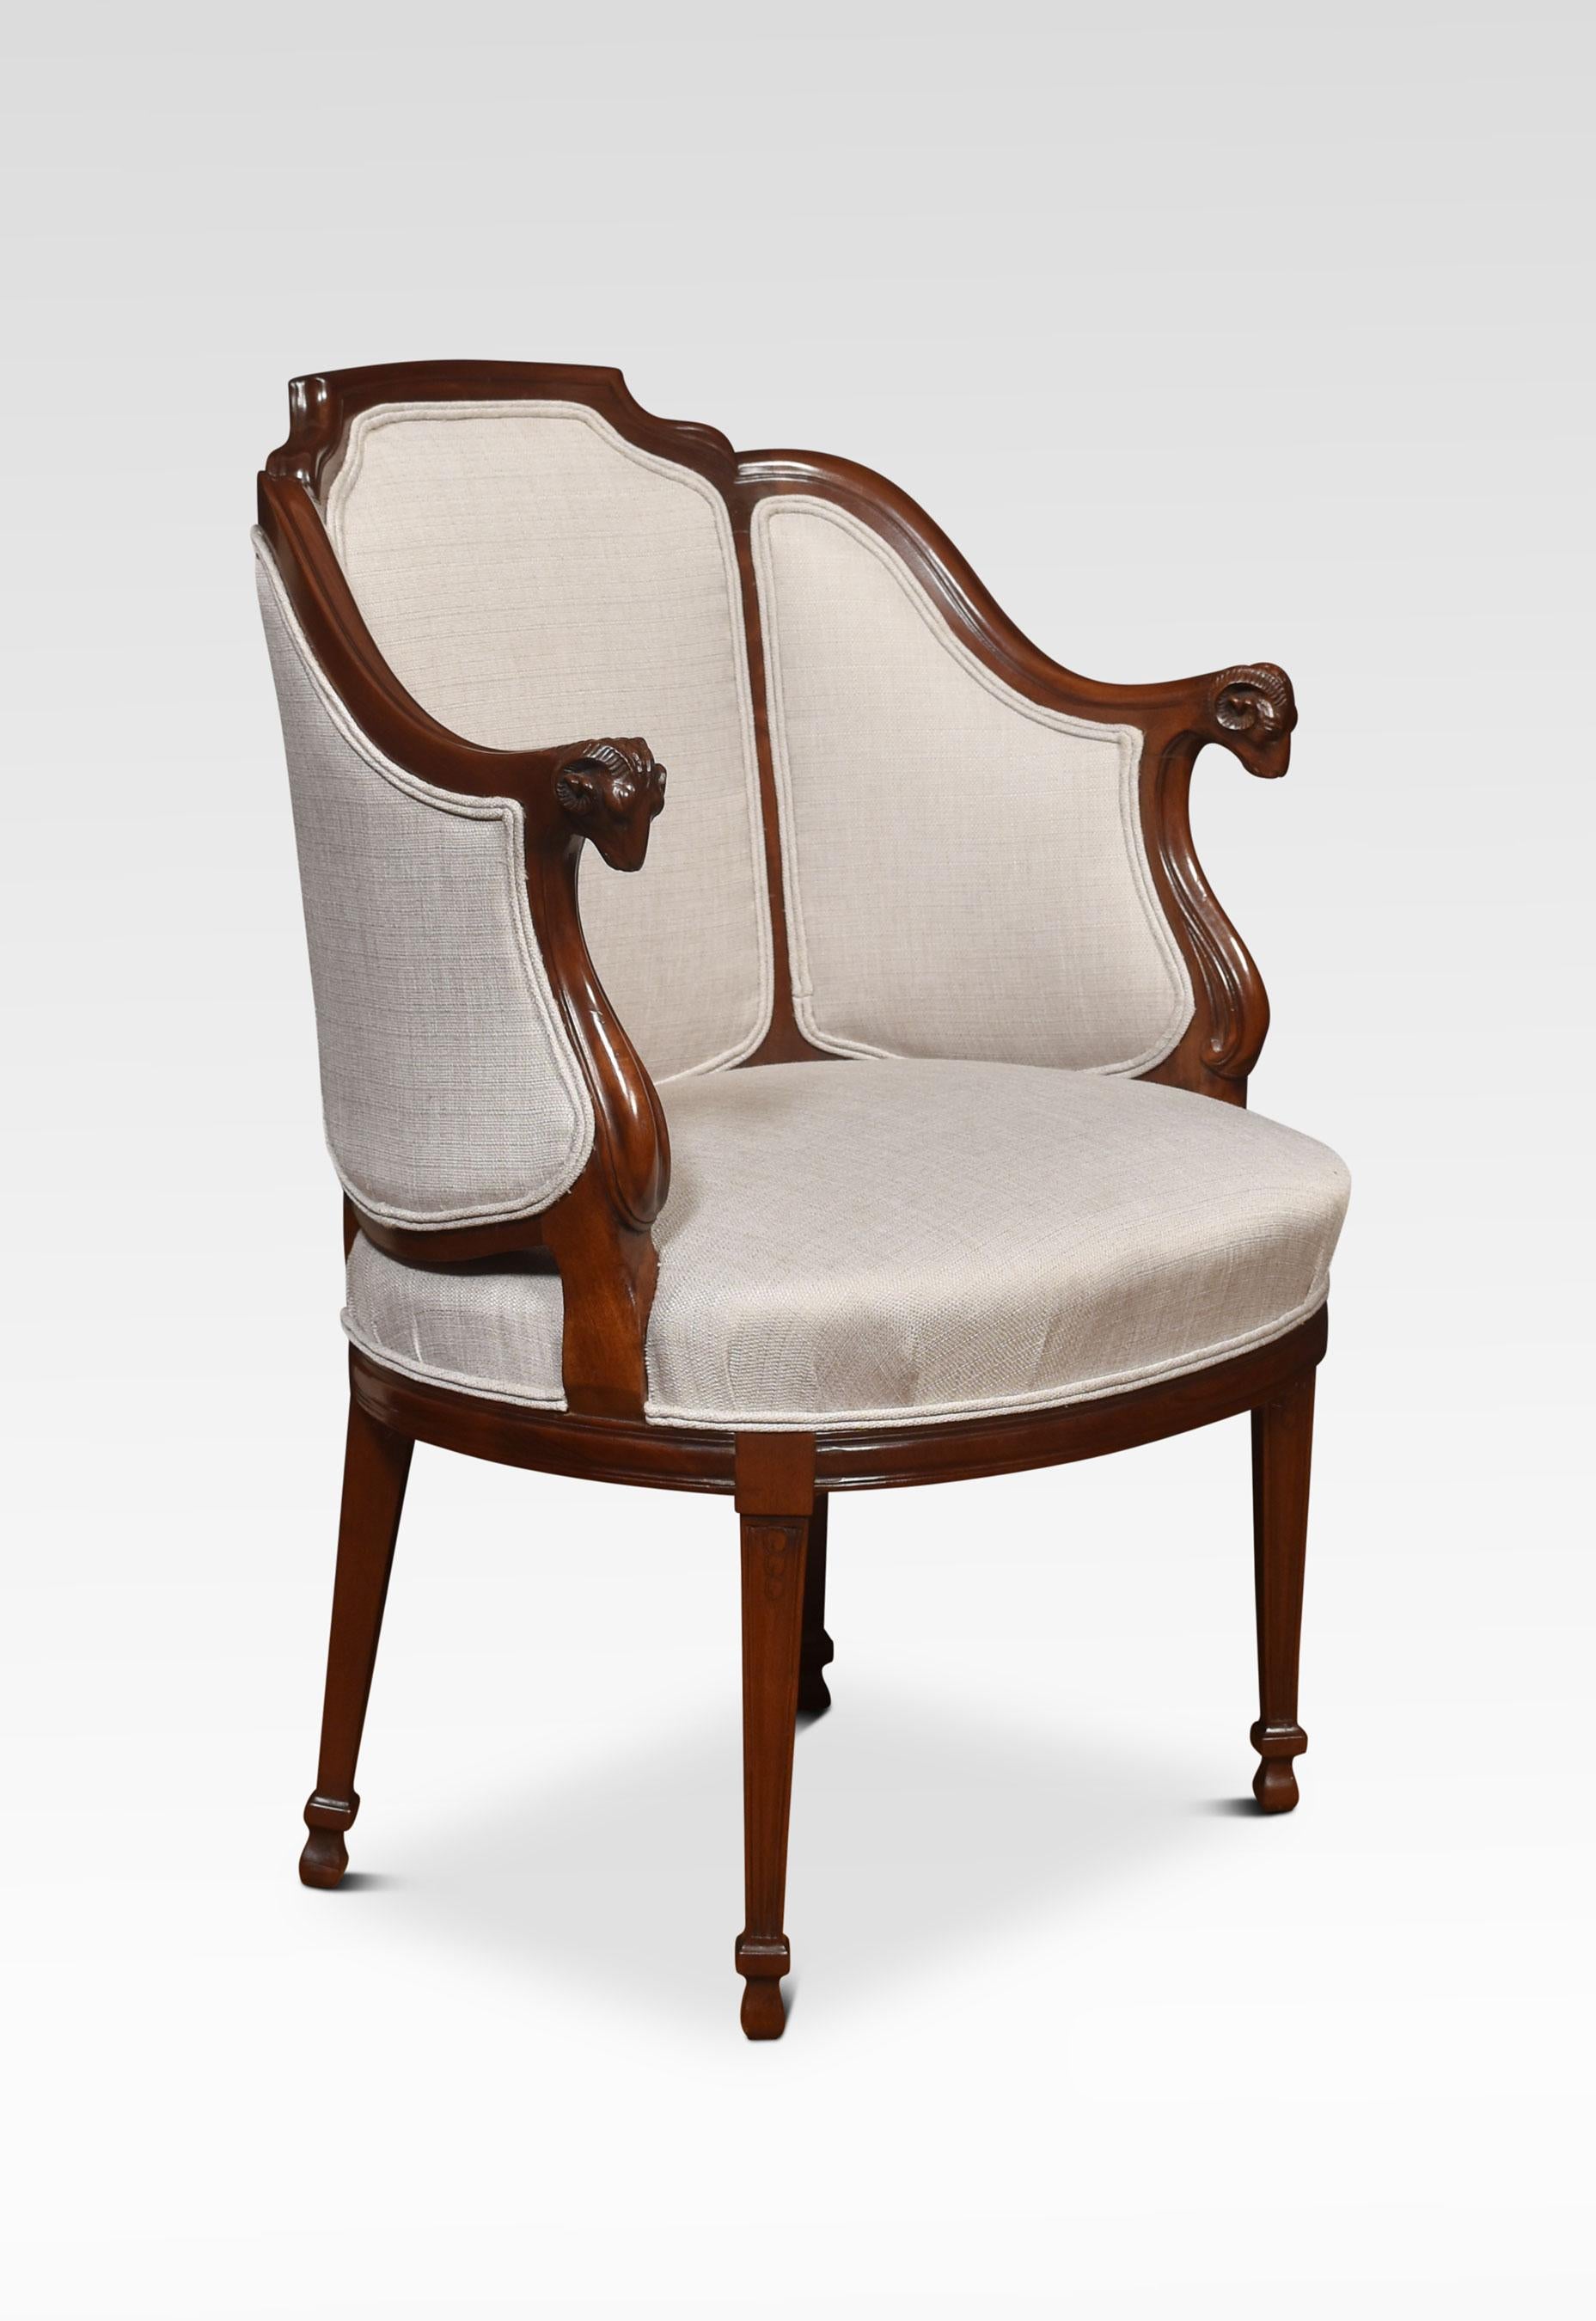 Pair of walnut framed tub armchairs the shaped top rails above upholstered back and seat enclosed by outswept rams headed arms. All raised up on tapering legs.
Dimensions
Height 35.5 inches height to seat 17.5 inches
Width 25.5 inches
Depth 23